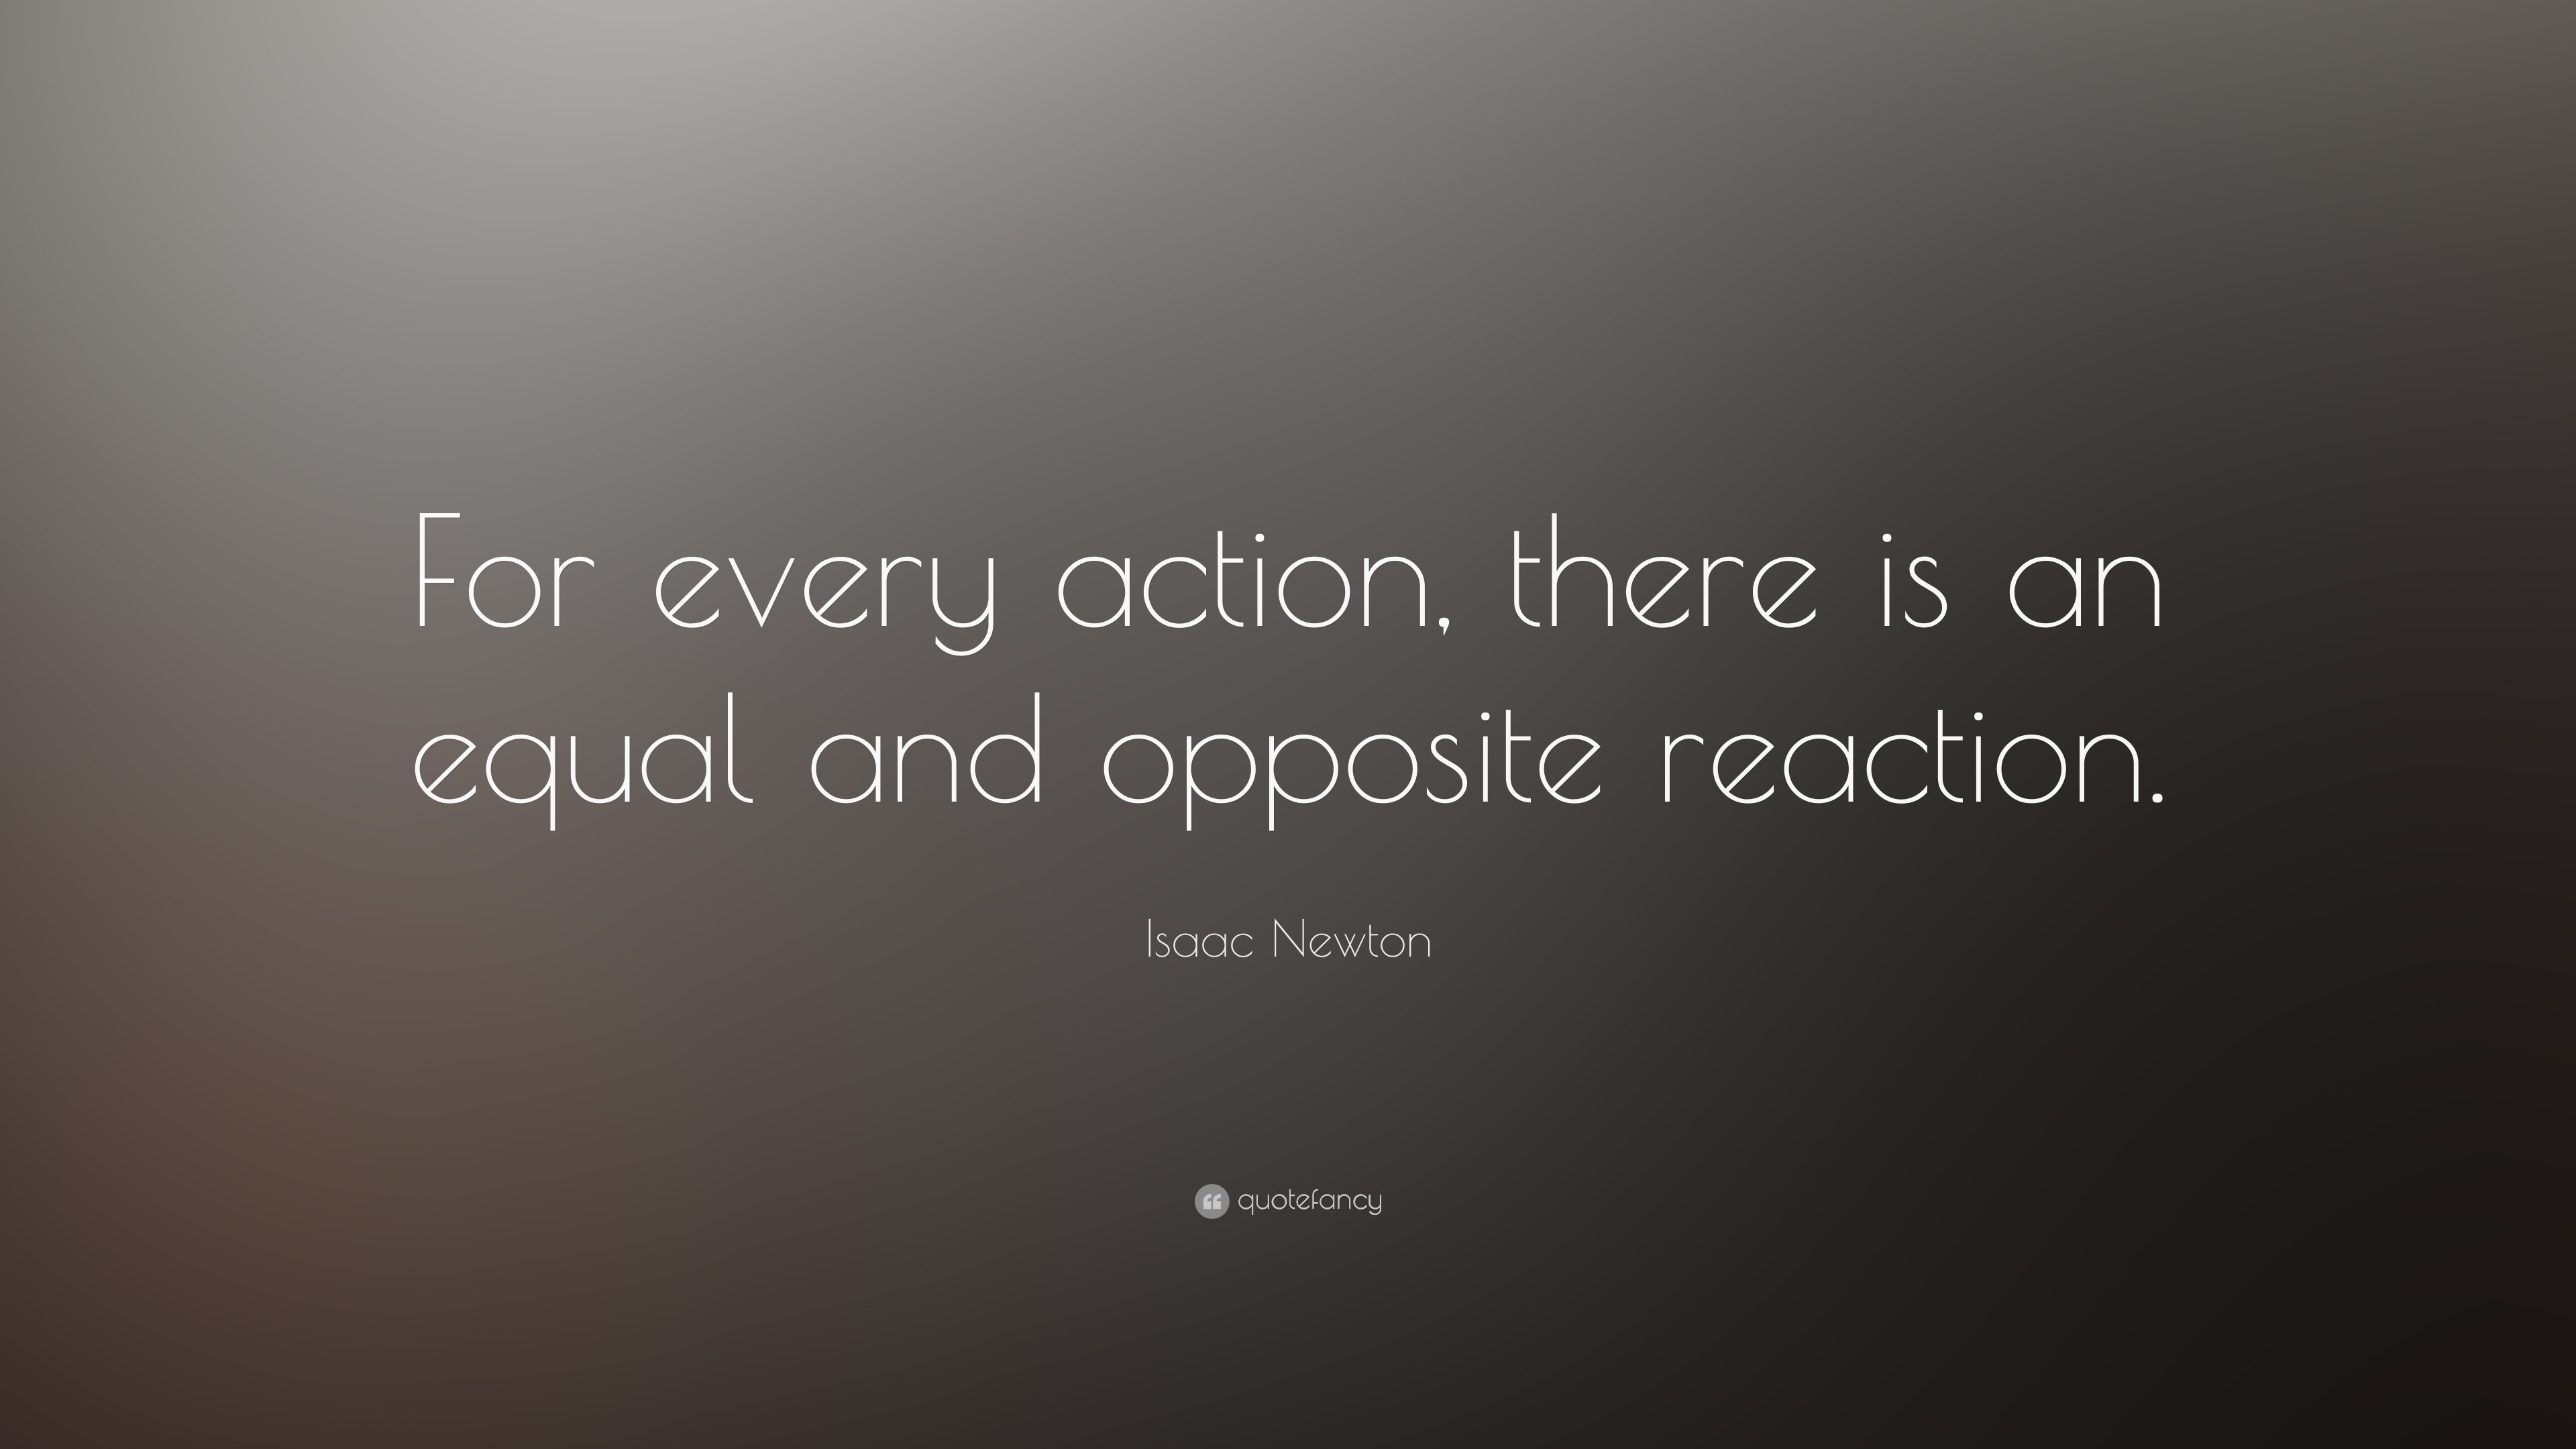 8581-Isaac-Newton-Quote-For-every-action-there-is-an-equal-and-opposite.jpg...